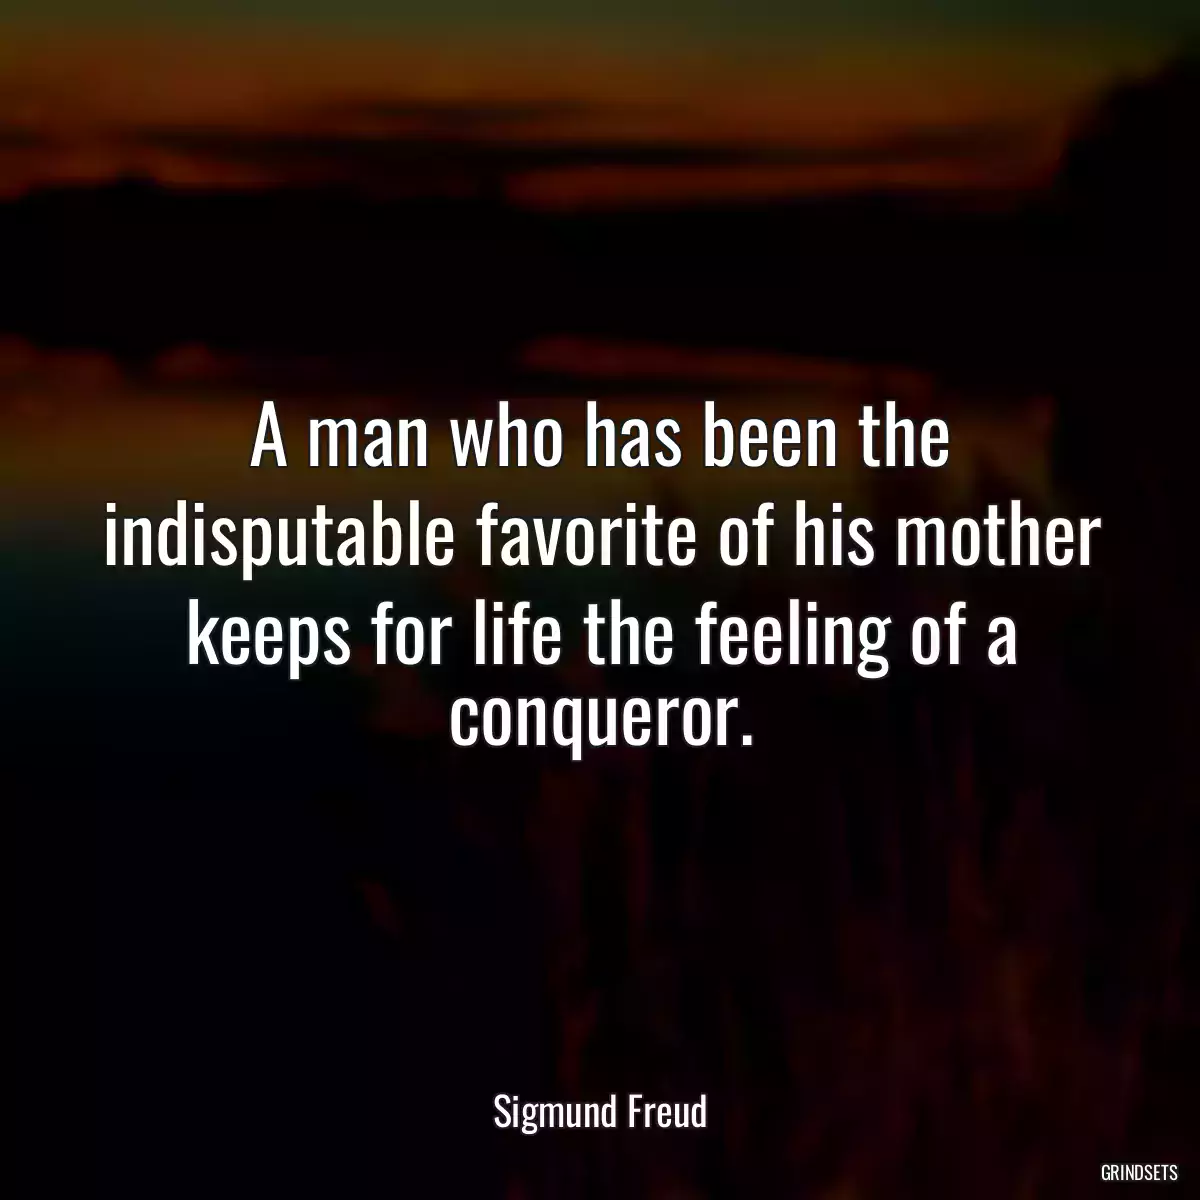 A man who has been the indisputable favorite of his mother keeps for life the feeling of a conqueror.